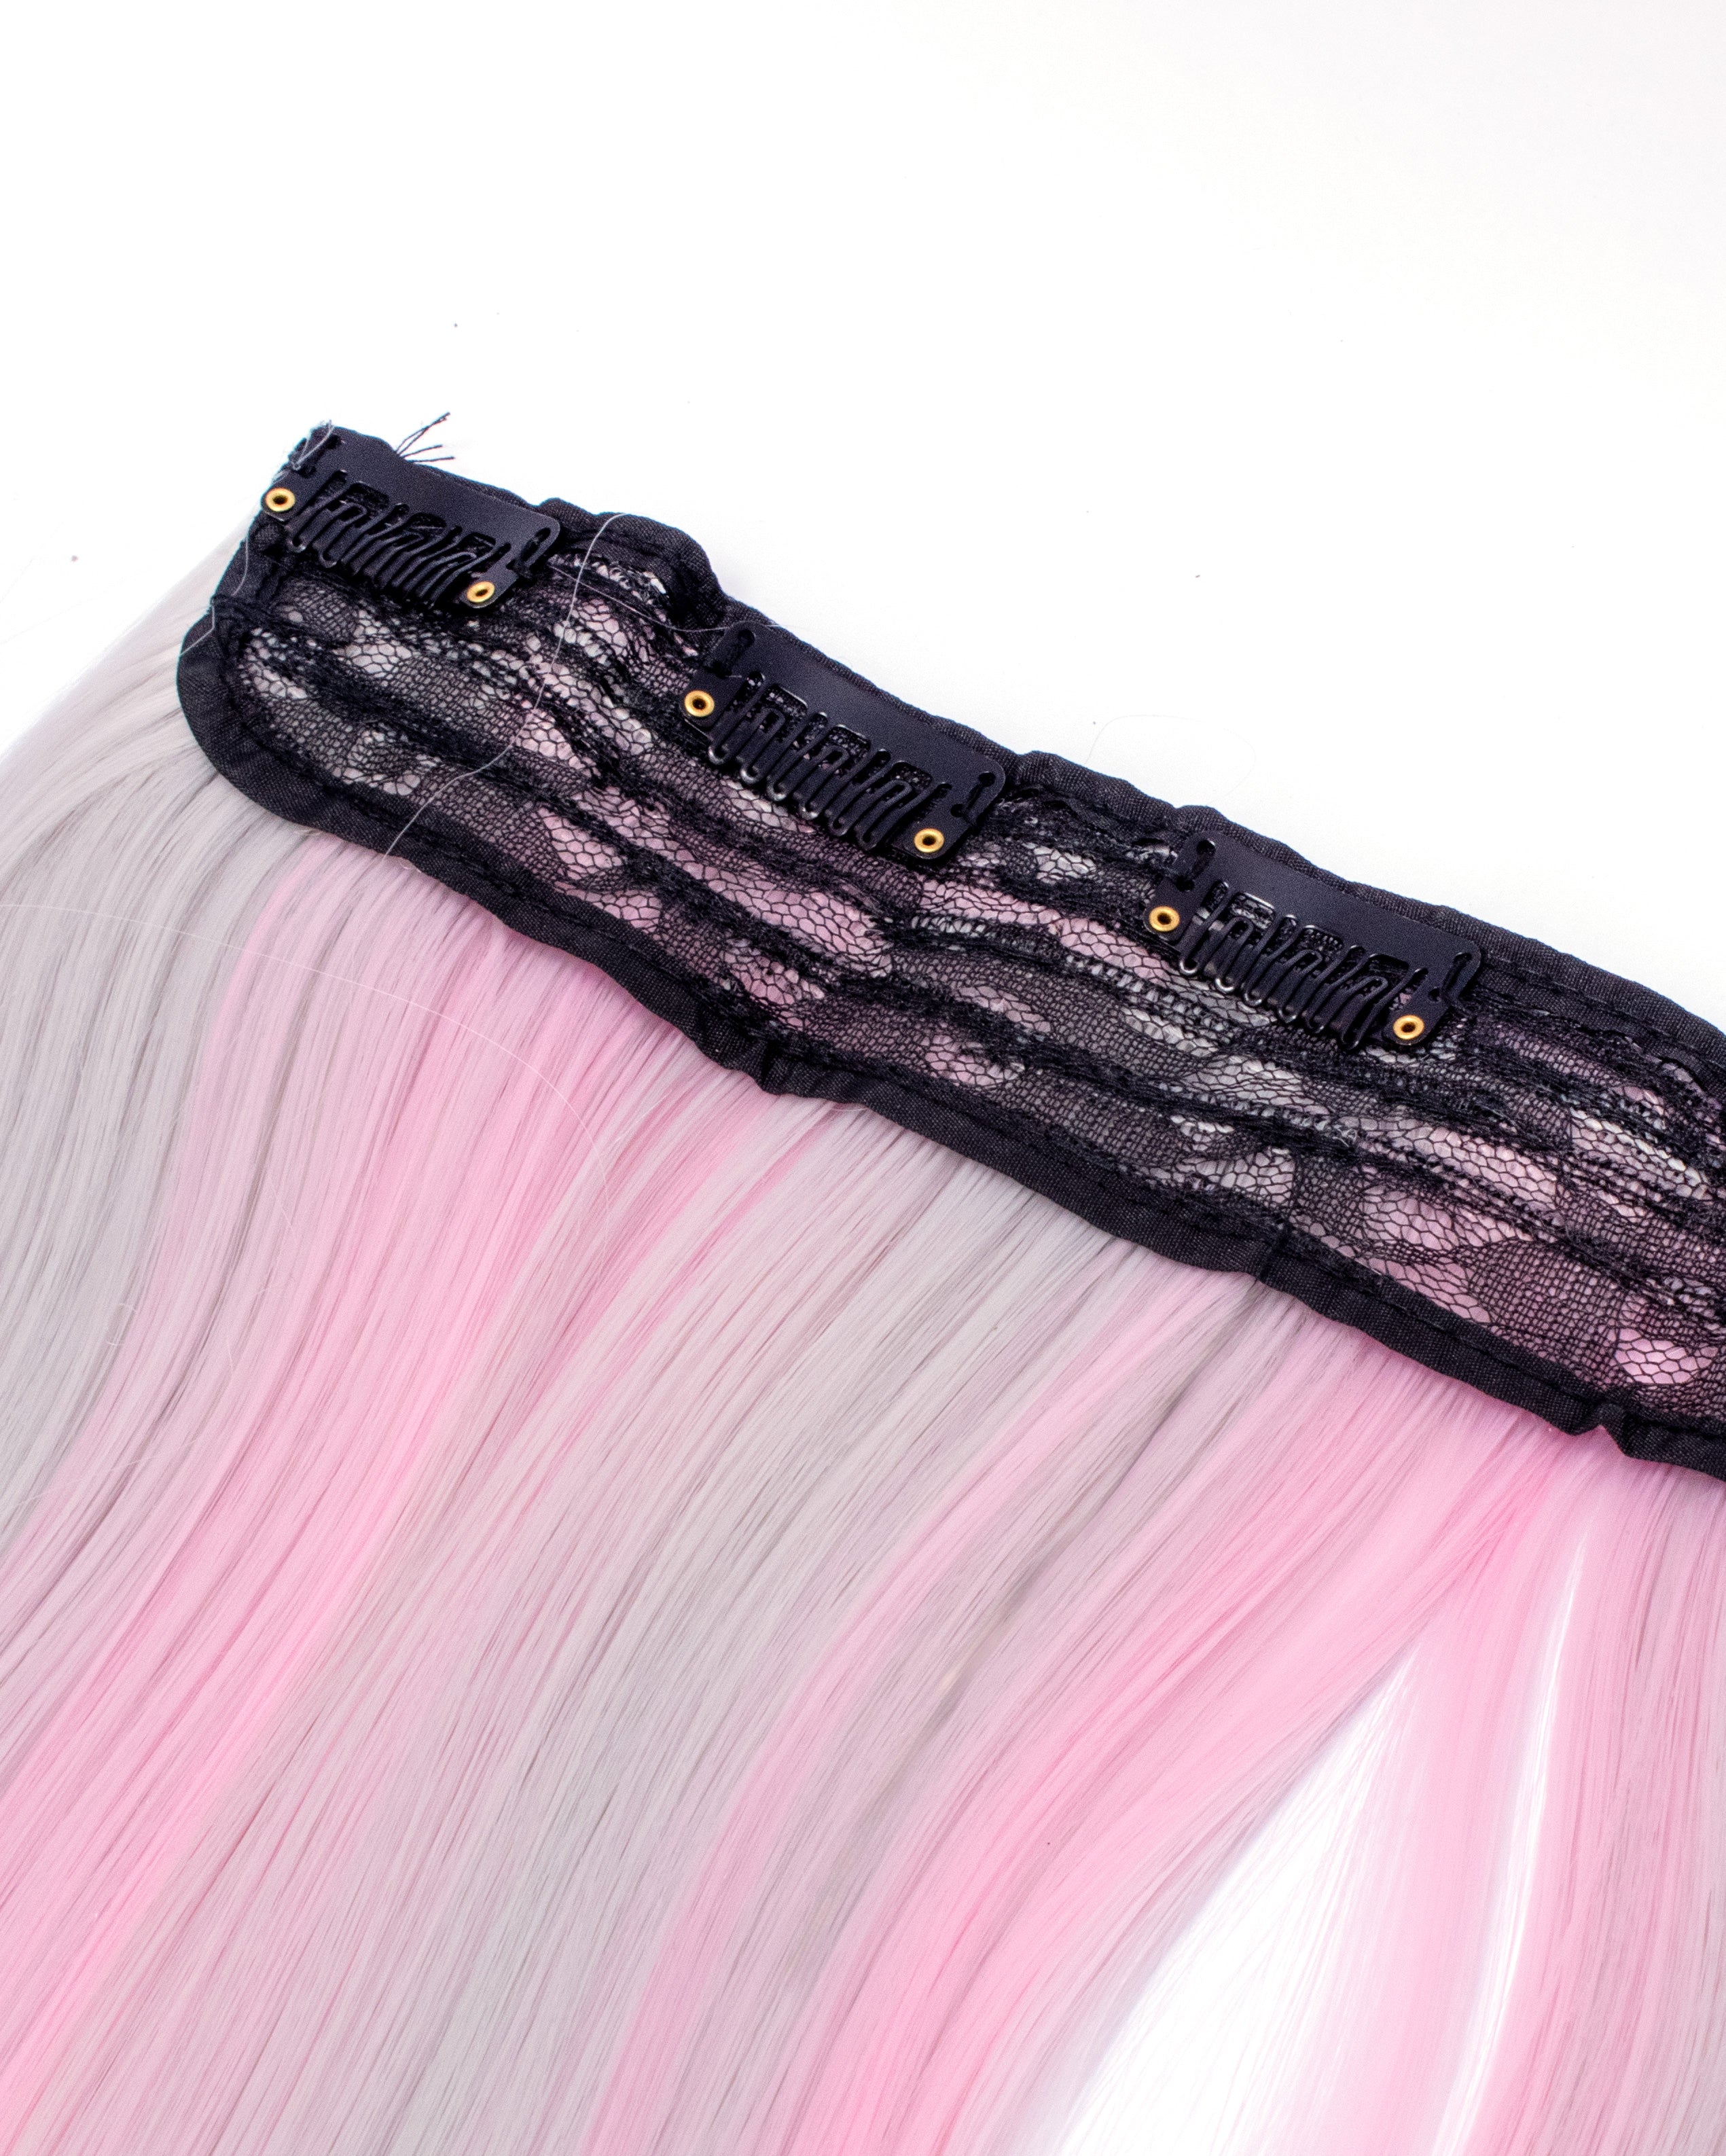 Pink and Grey Clip-In Extension (Single Piece) - Lunautics Clip-In Extensions